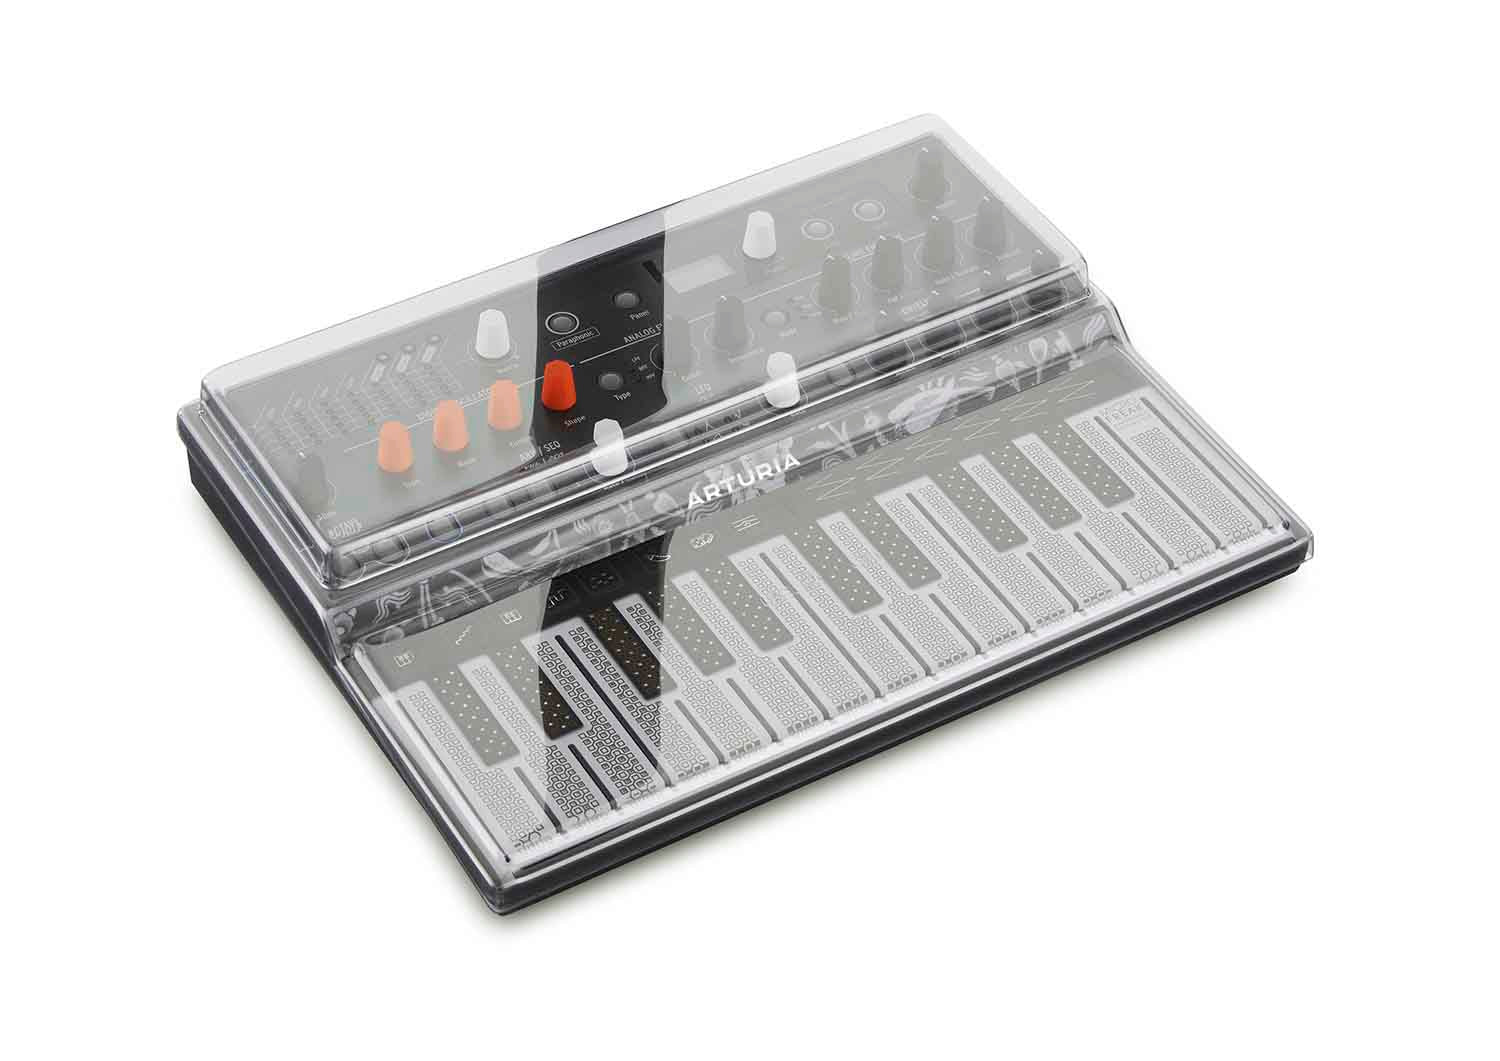 B-Stock: Decksaver DS-PC-MICROFREAK Protection Cover for Arturia Microfreak Synthesizer - Hollywood DJ